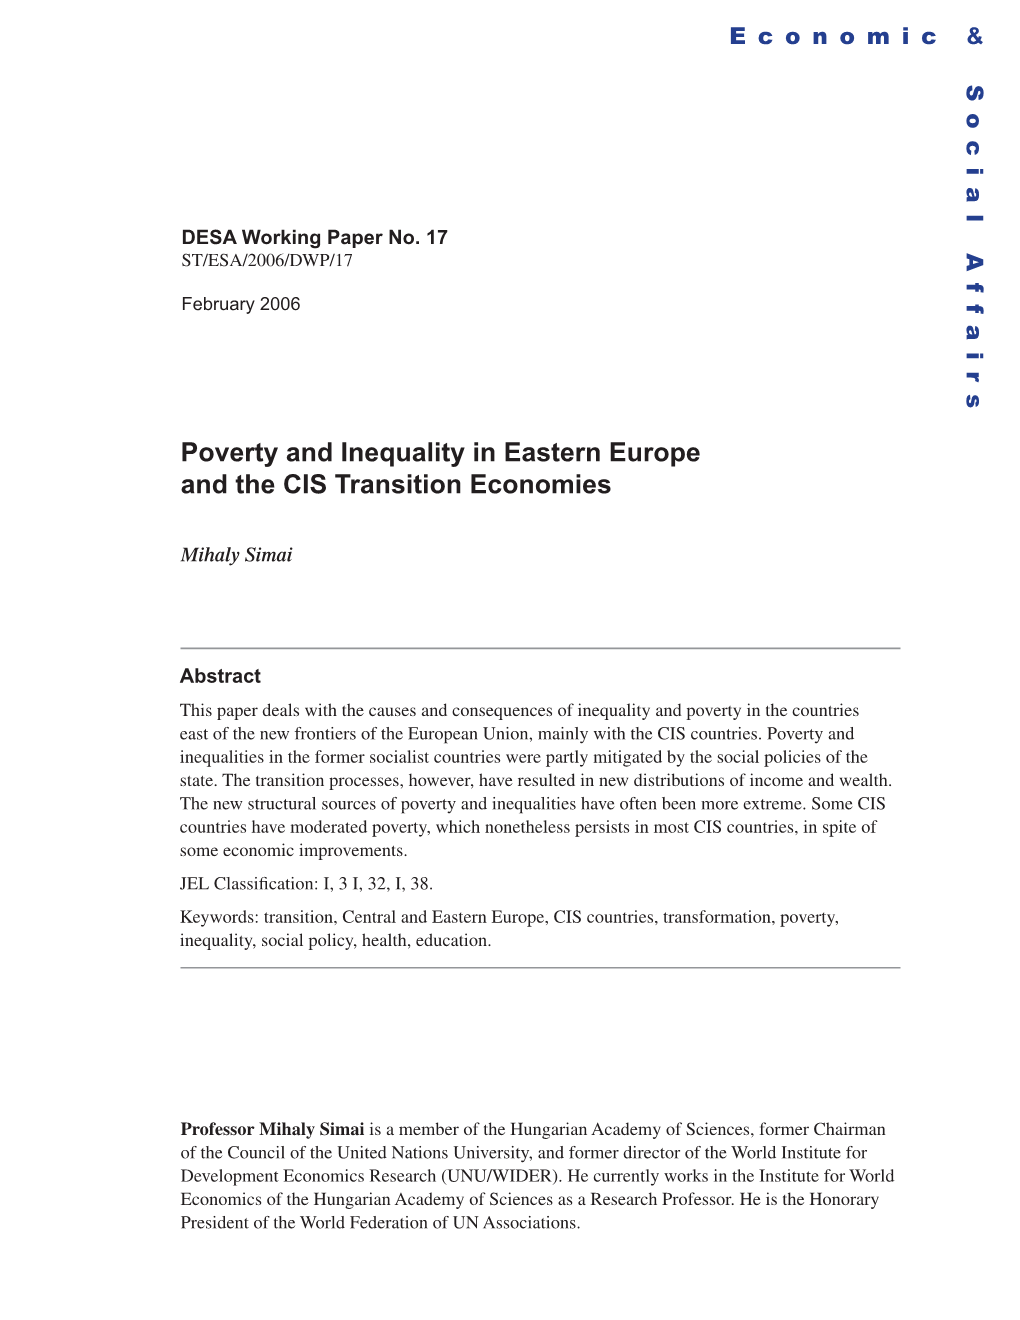 Poverty and Inequality in Eastern Europe and the CIS Transition Economies